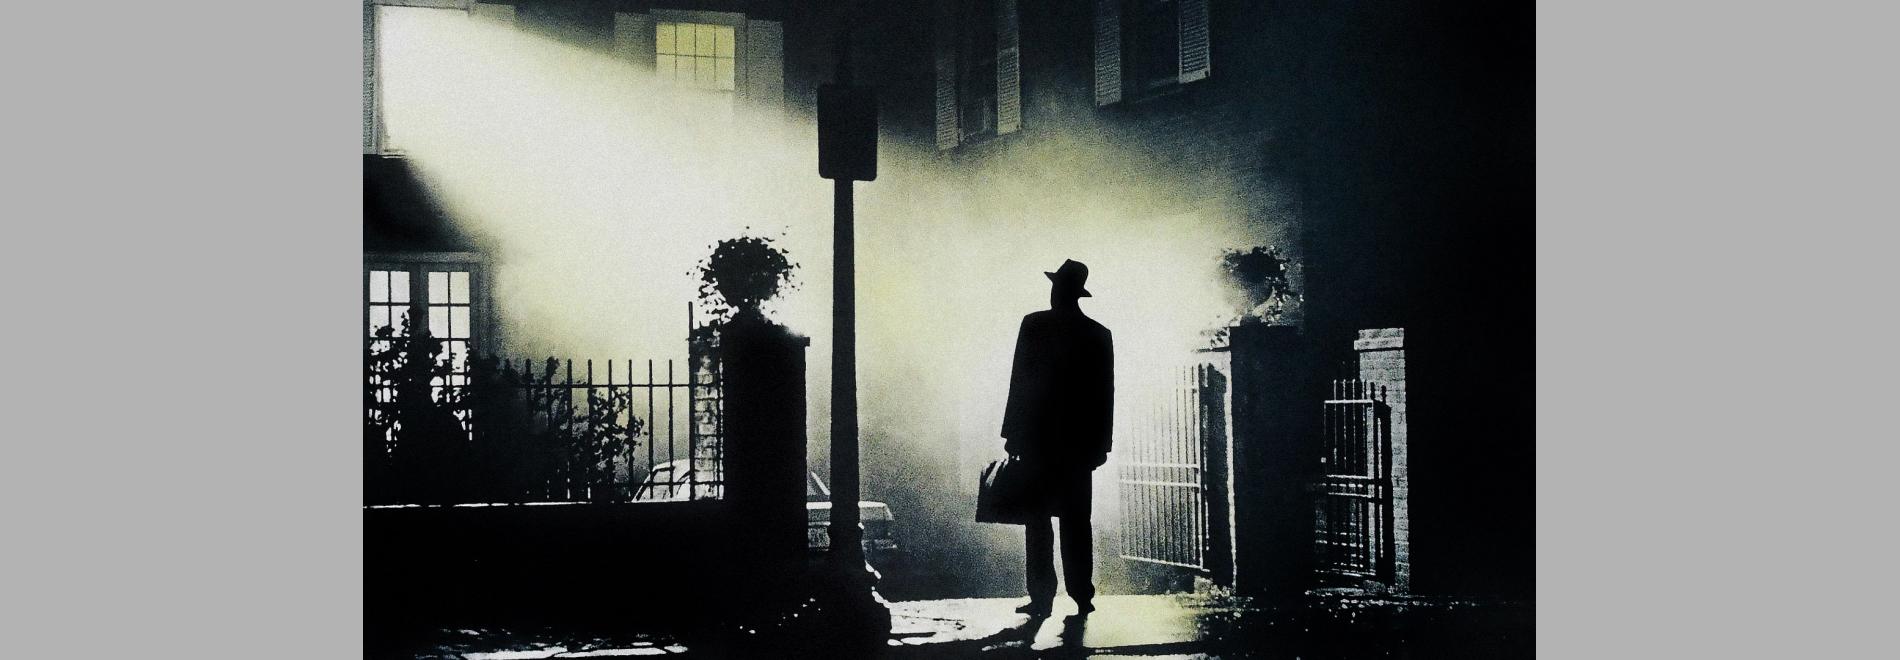 The Exorcist - Director's Cut (William Friedkin, 1973)